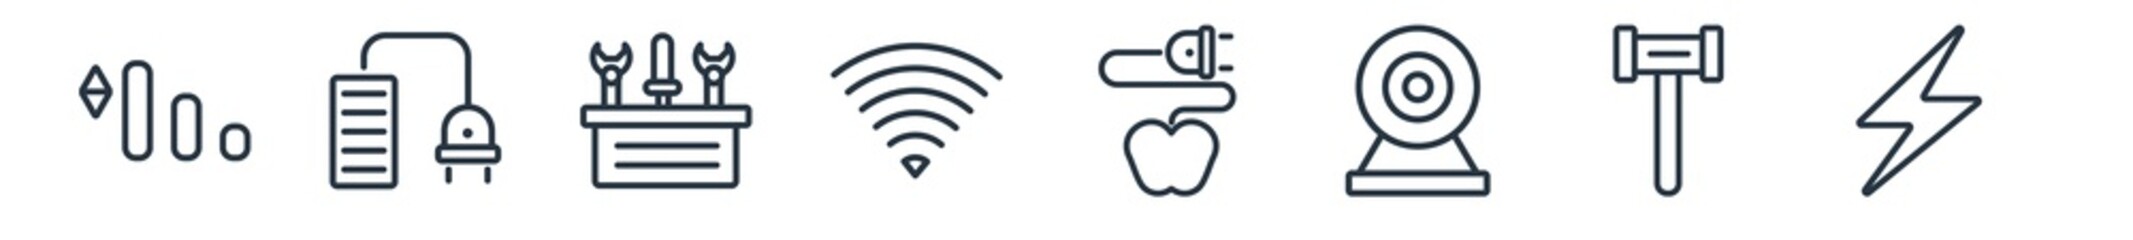 linear set of electrian connections outline icons. line vector icons such as medium, charging, toolbox, , apple, electricity vector illustration.